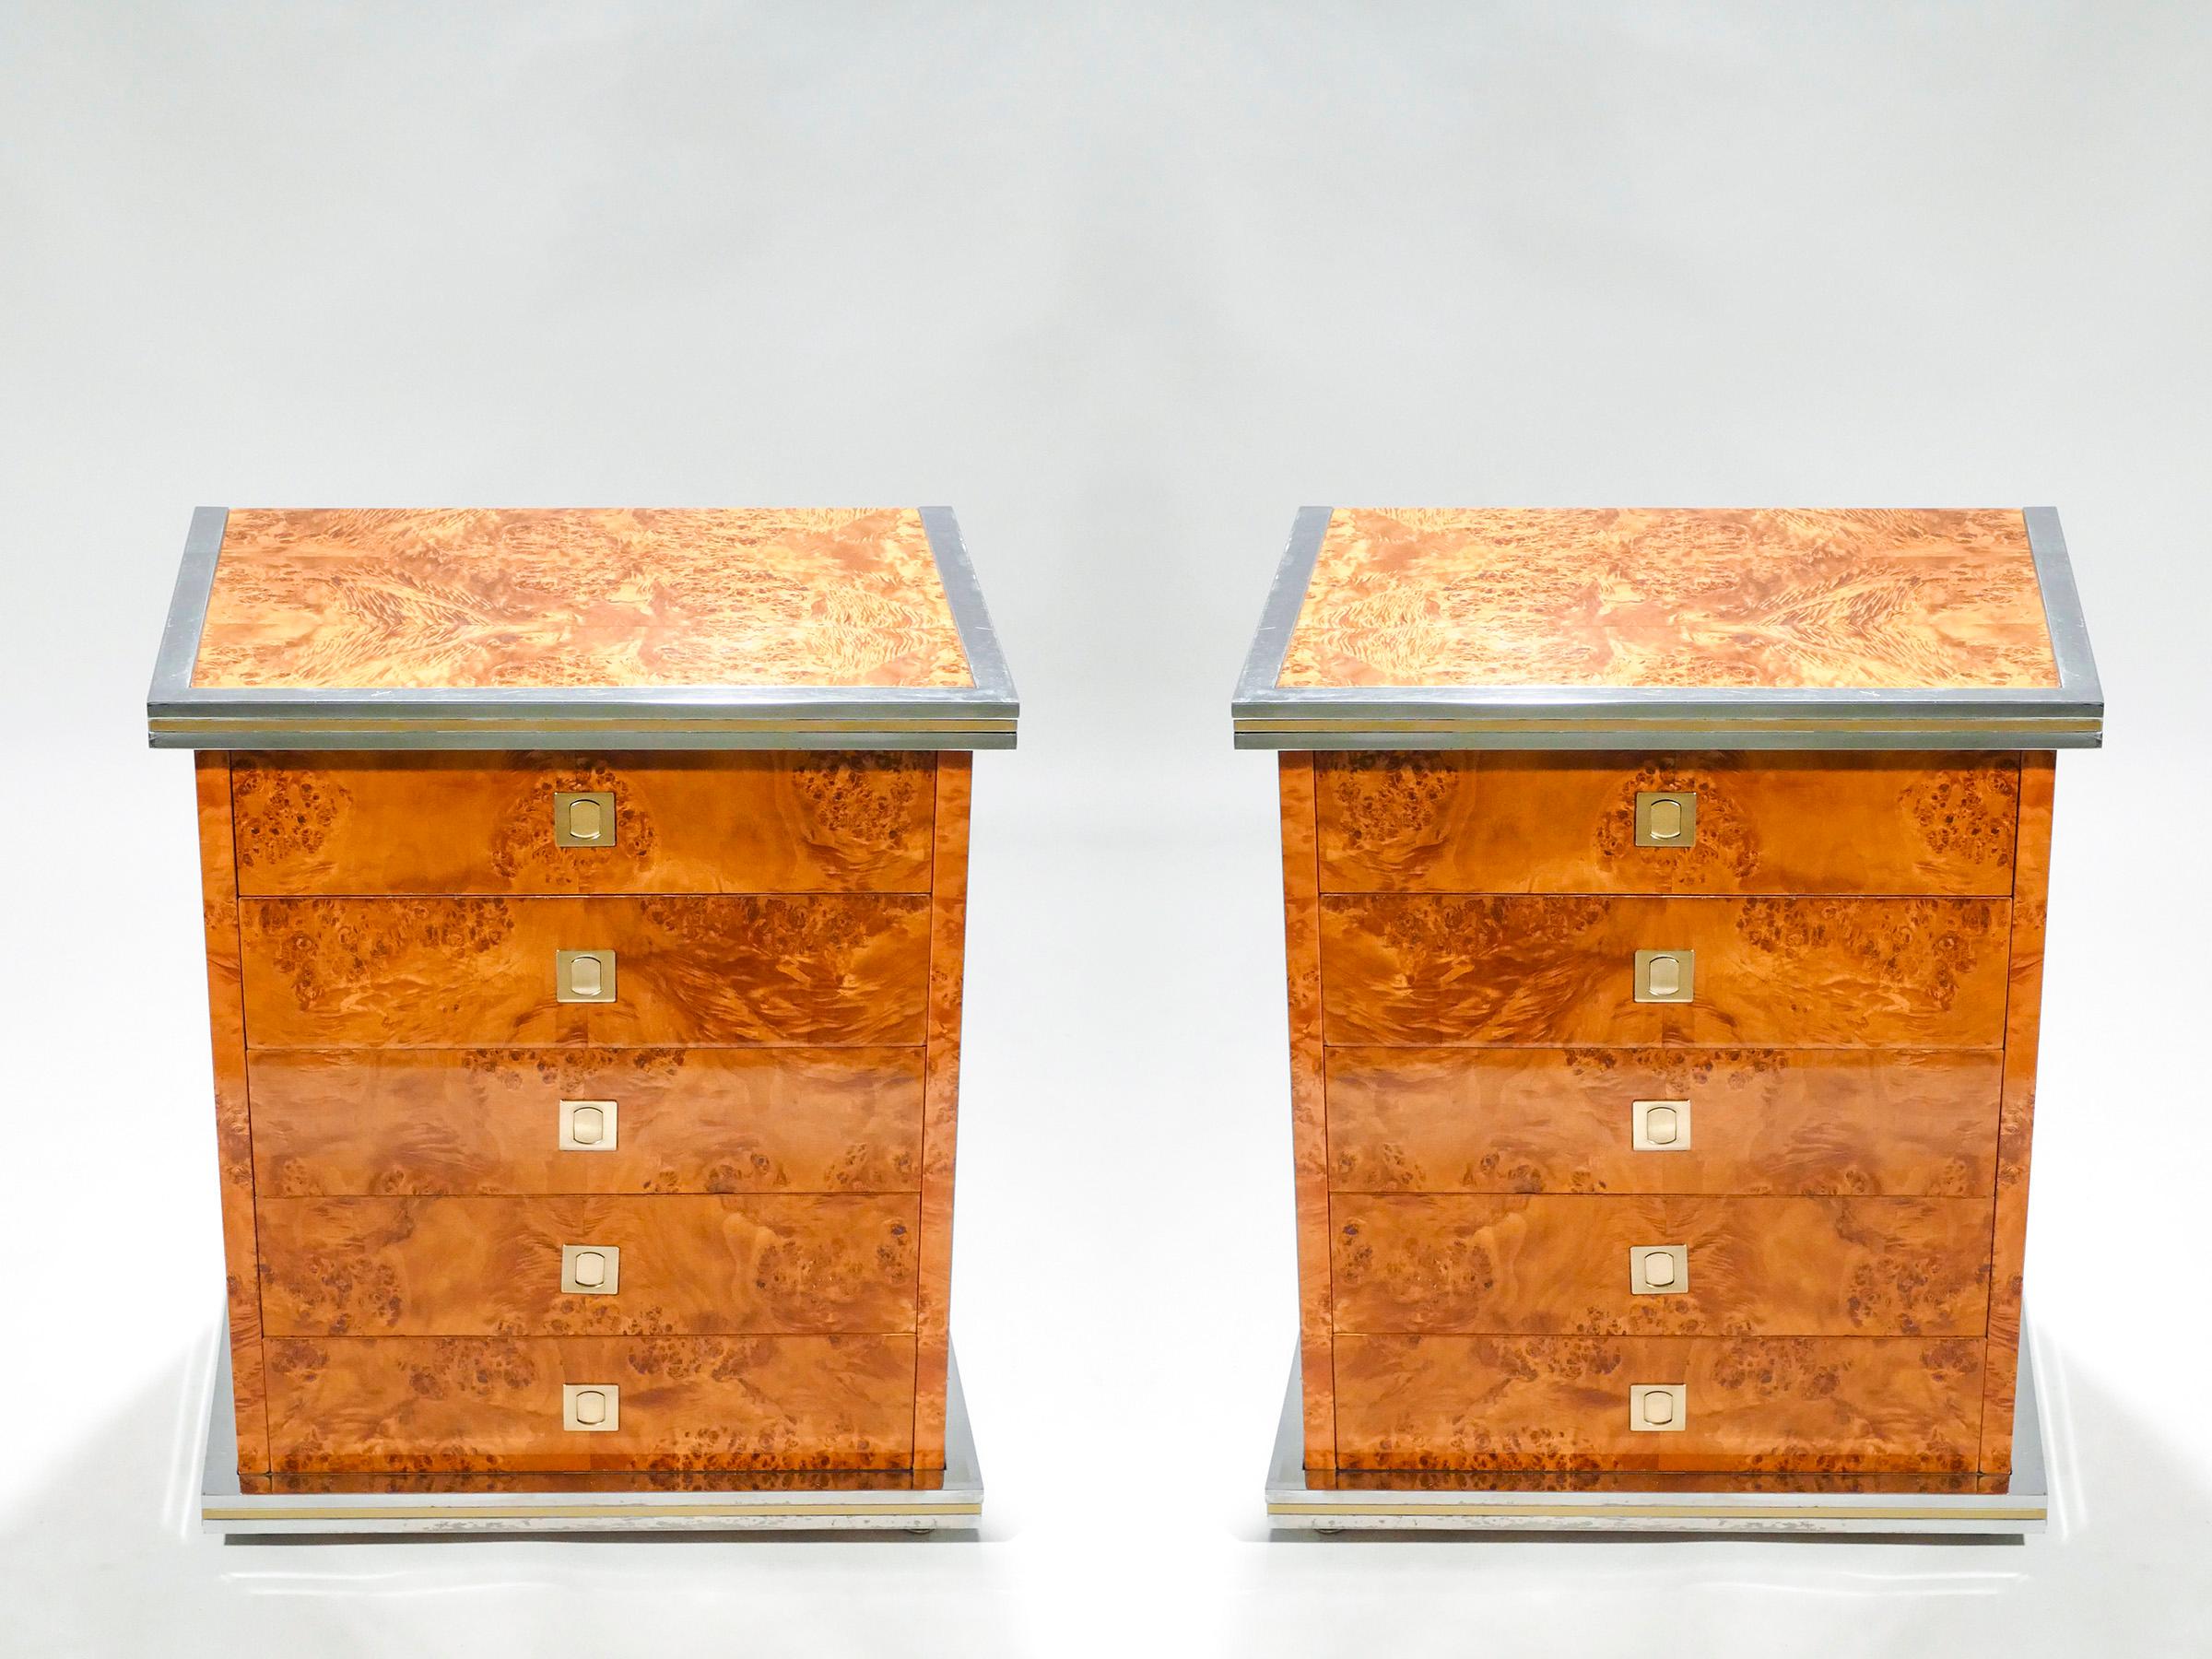 A rare and breathtaking Italian midcentury pair by Willy Rizzo from the 1970s, these chests of drawers have a bright and high-end feel, a relic of his time designing for the glamorous members of the so-called dolce VITA. Rich lacquered burl wood